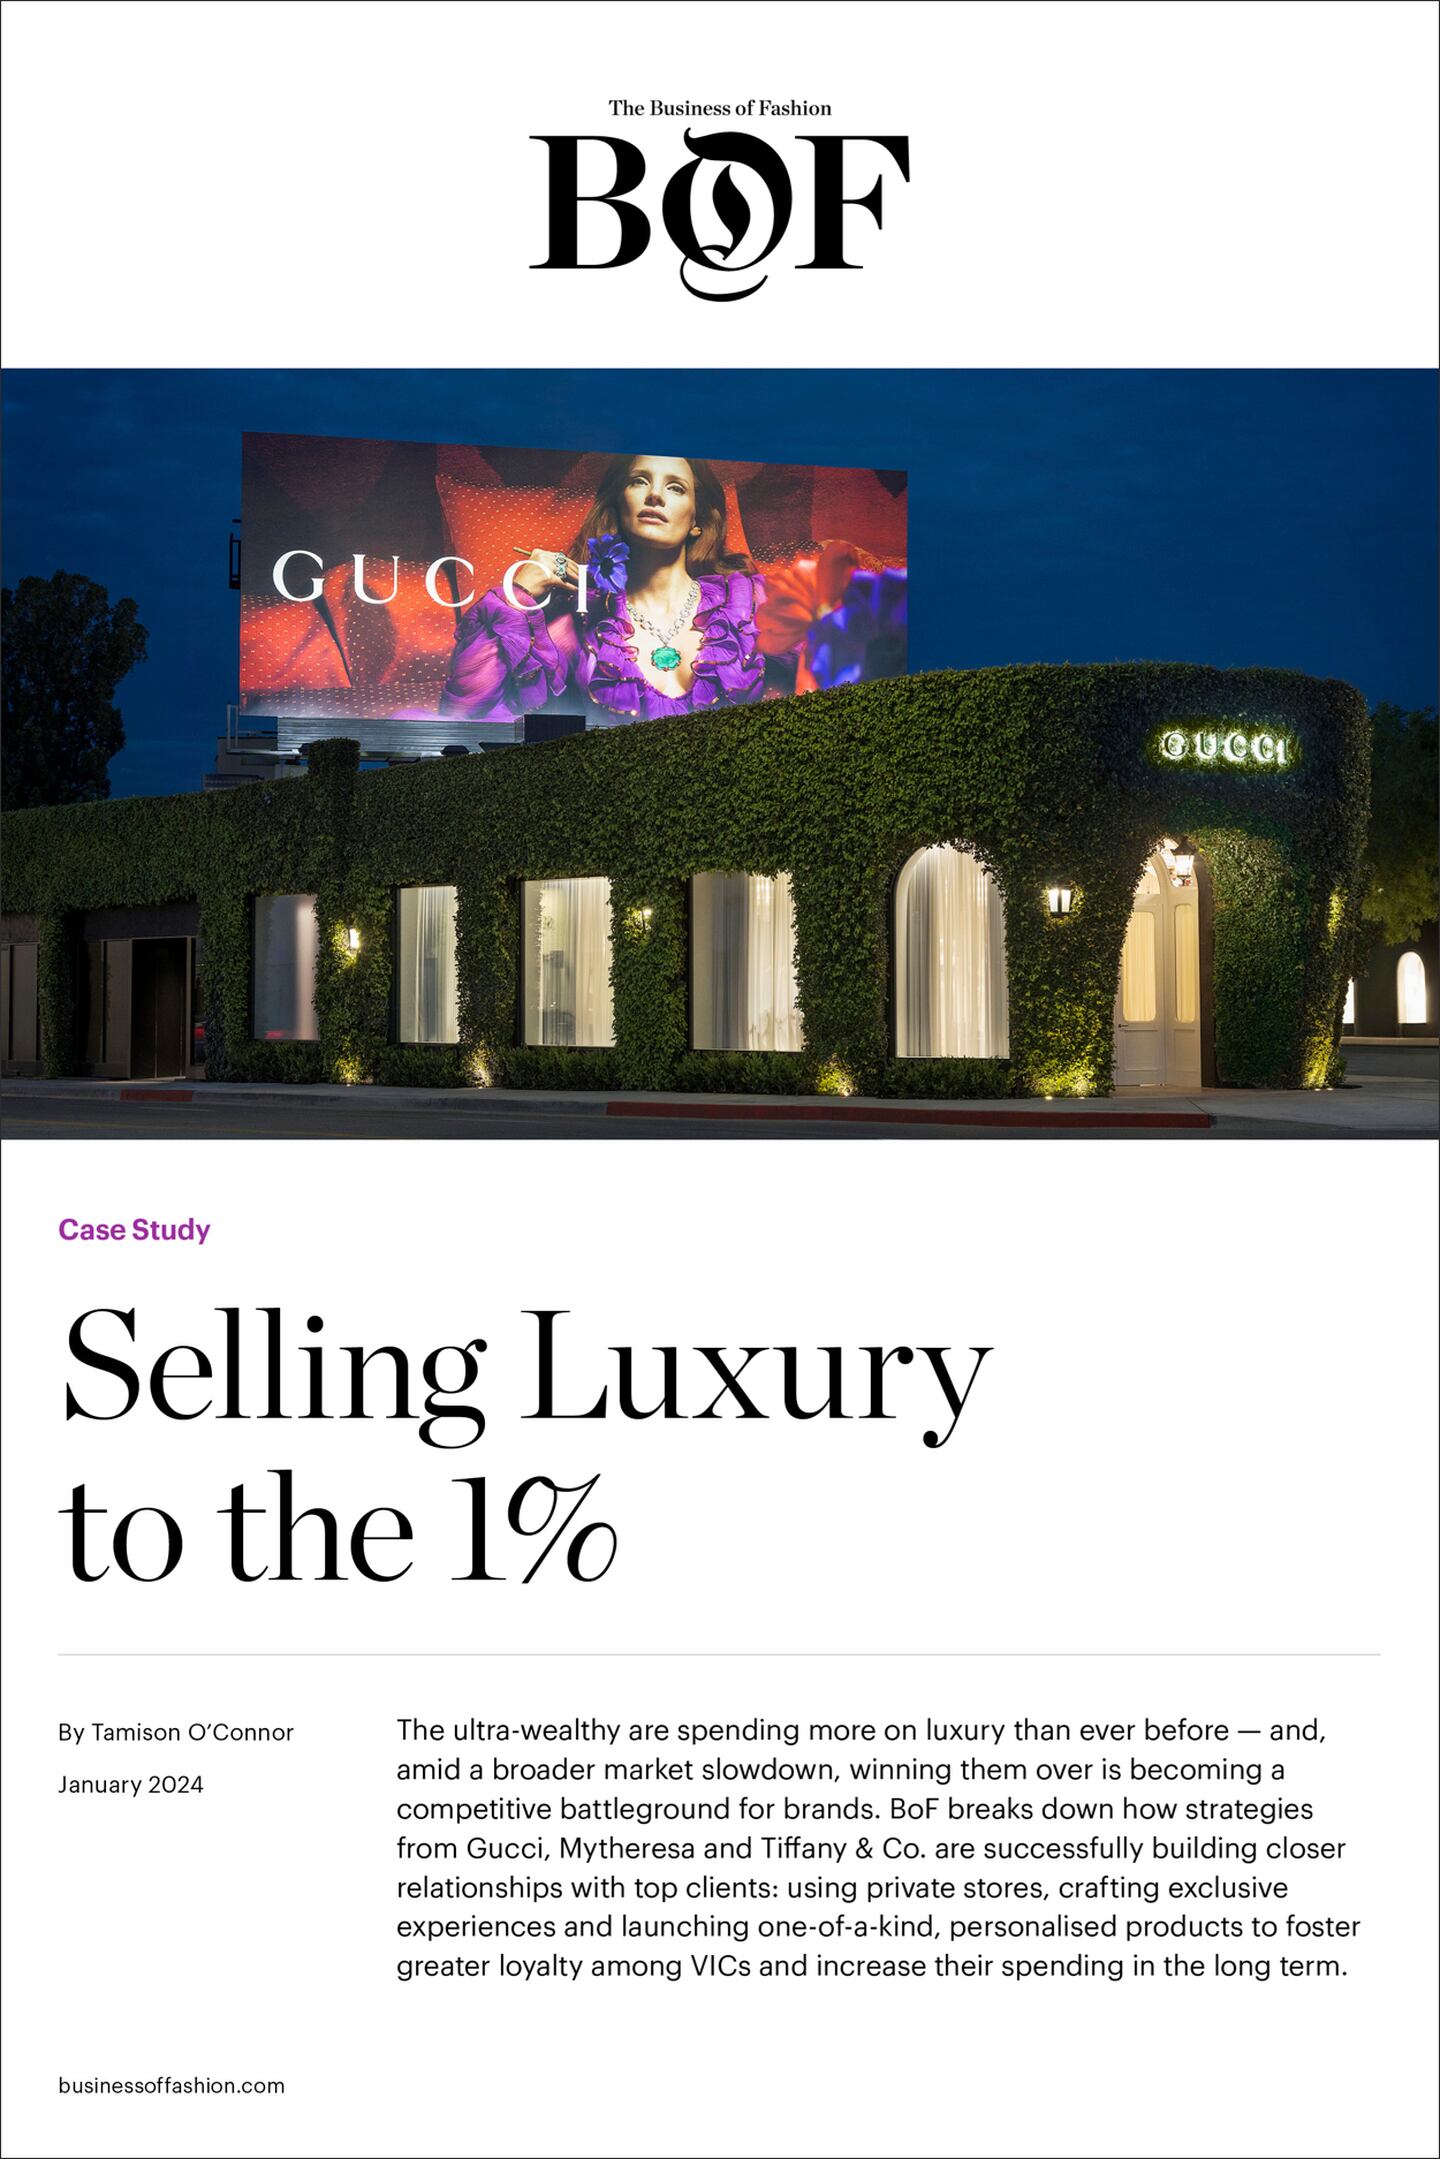 Case study cover, Selling Luxury to the 1%